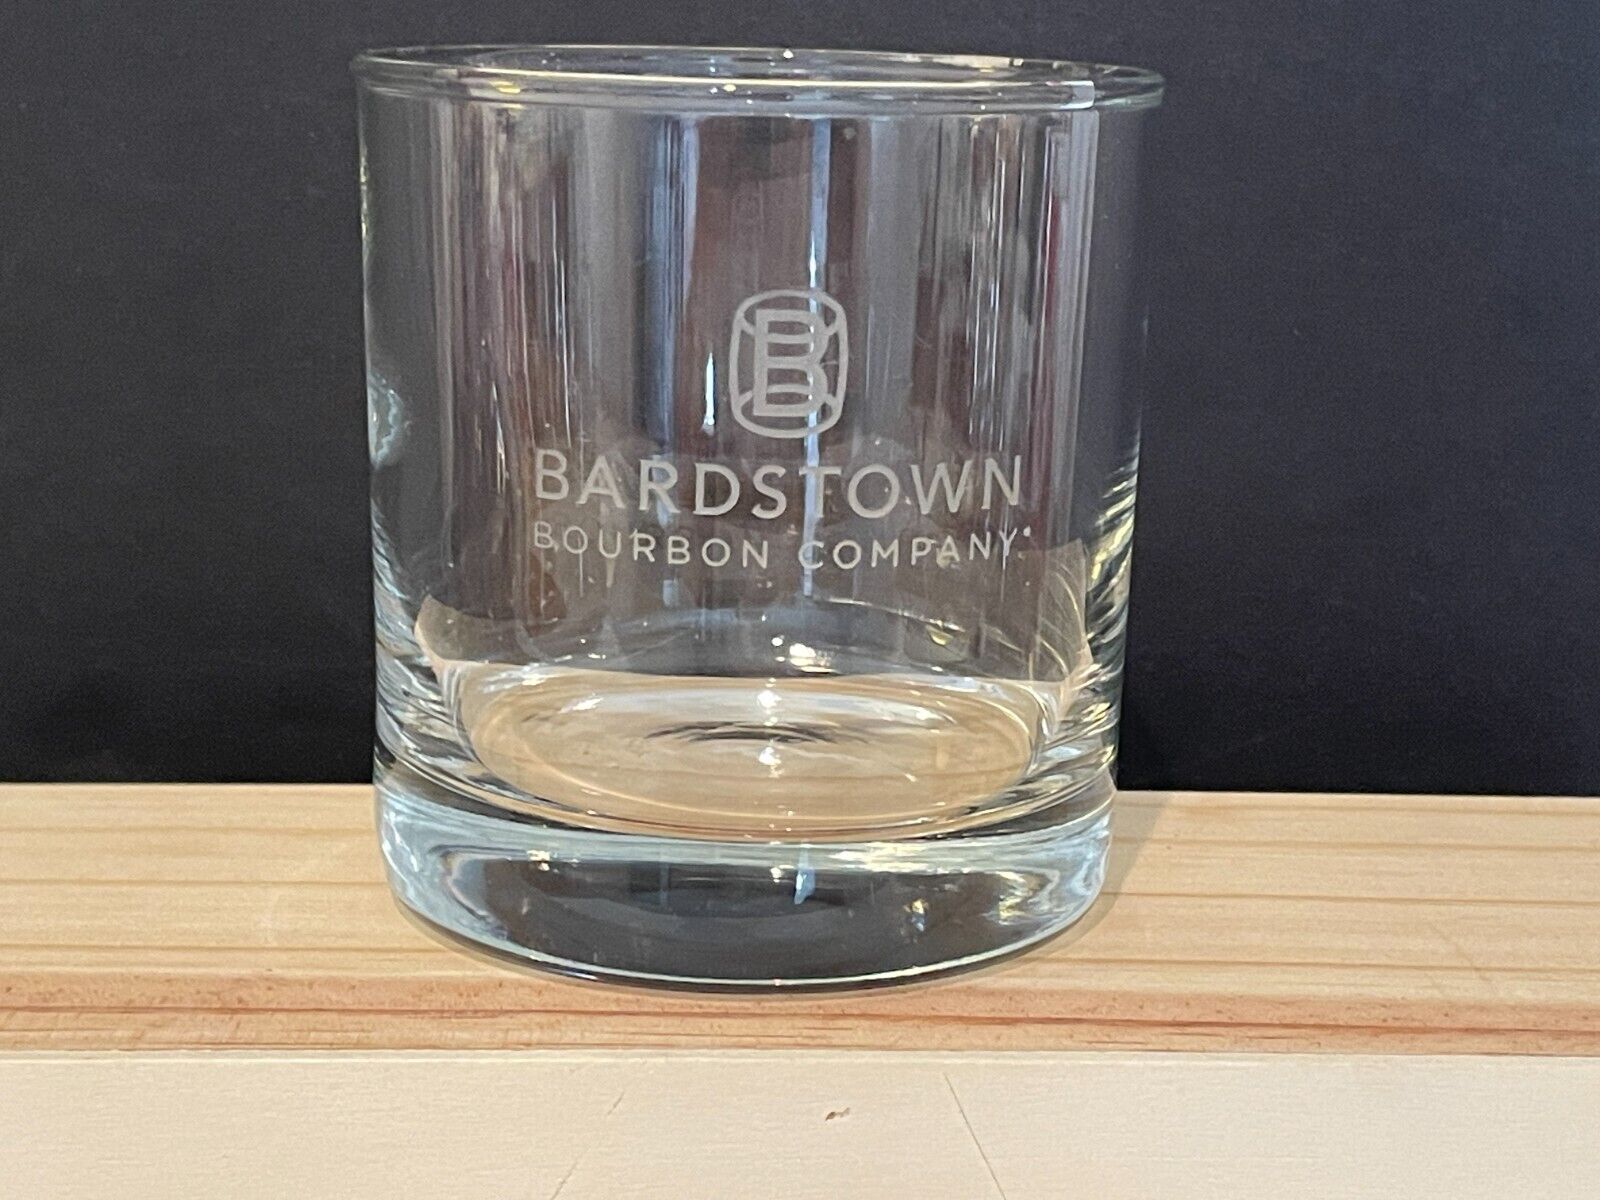 Bardstown Bourbon Company Etched Bourbon Whiskey Rocks Glass